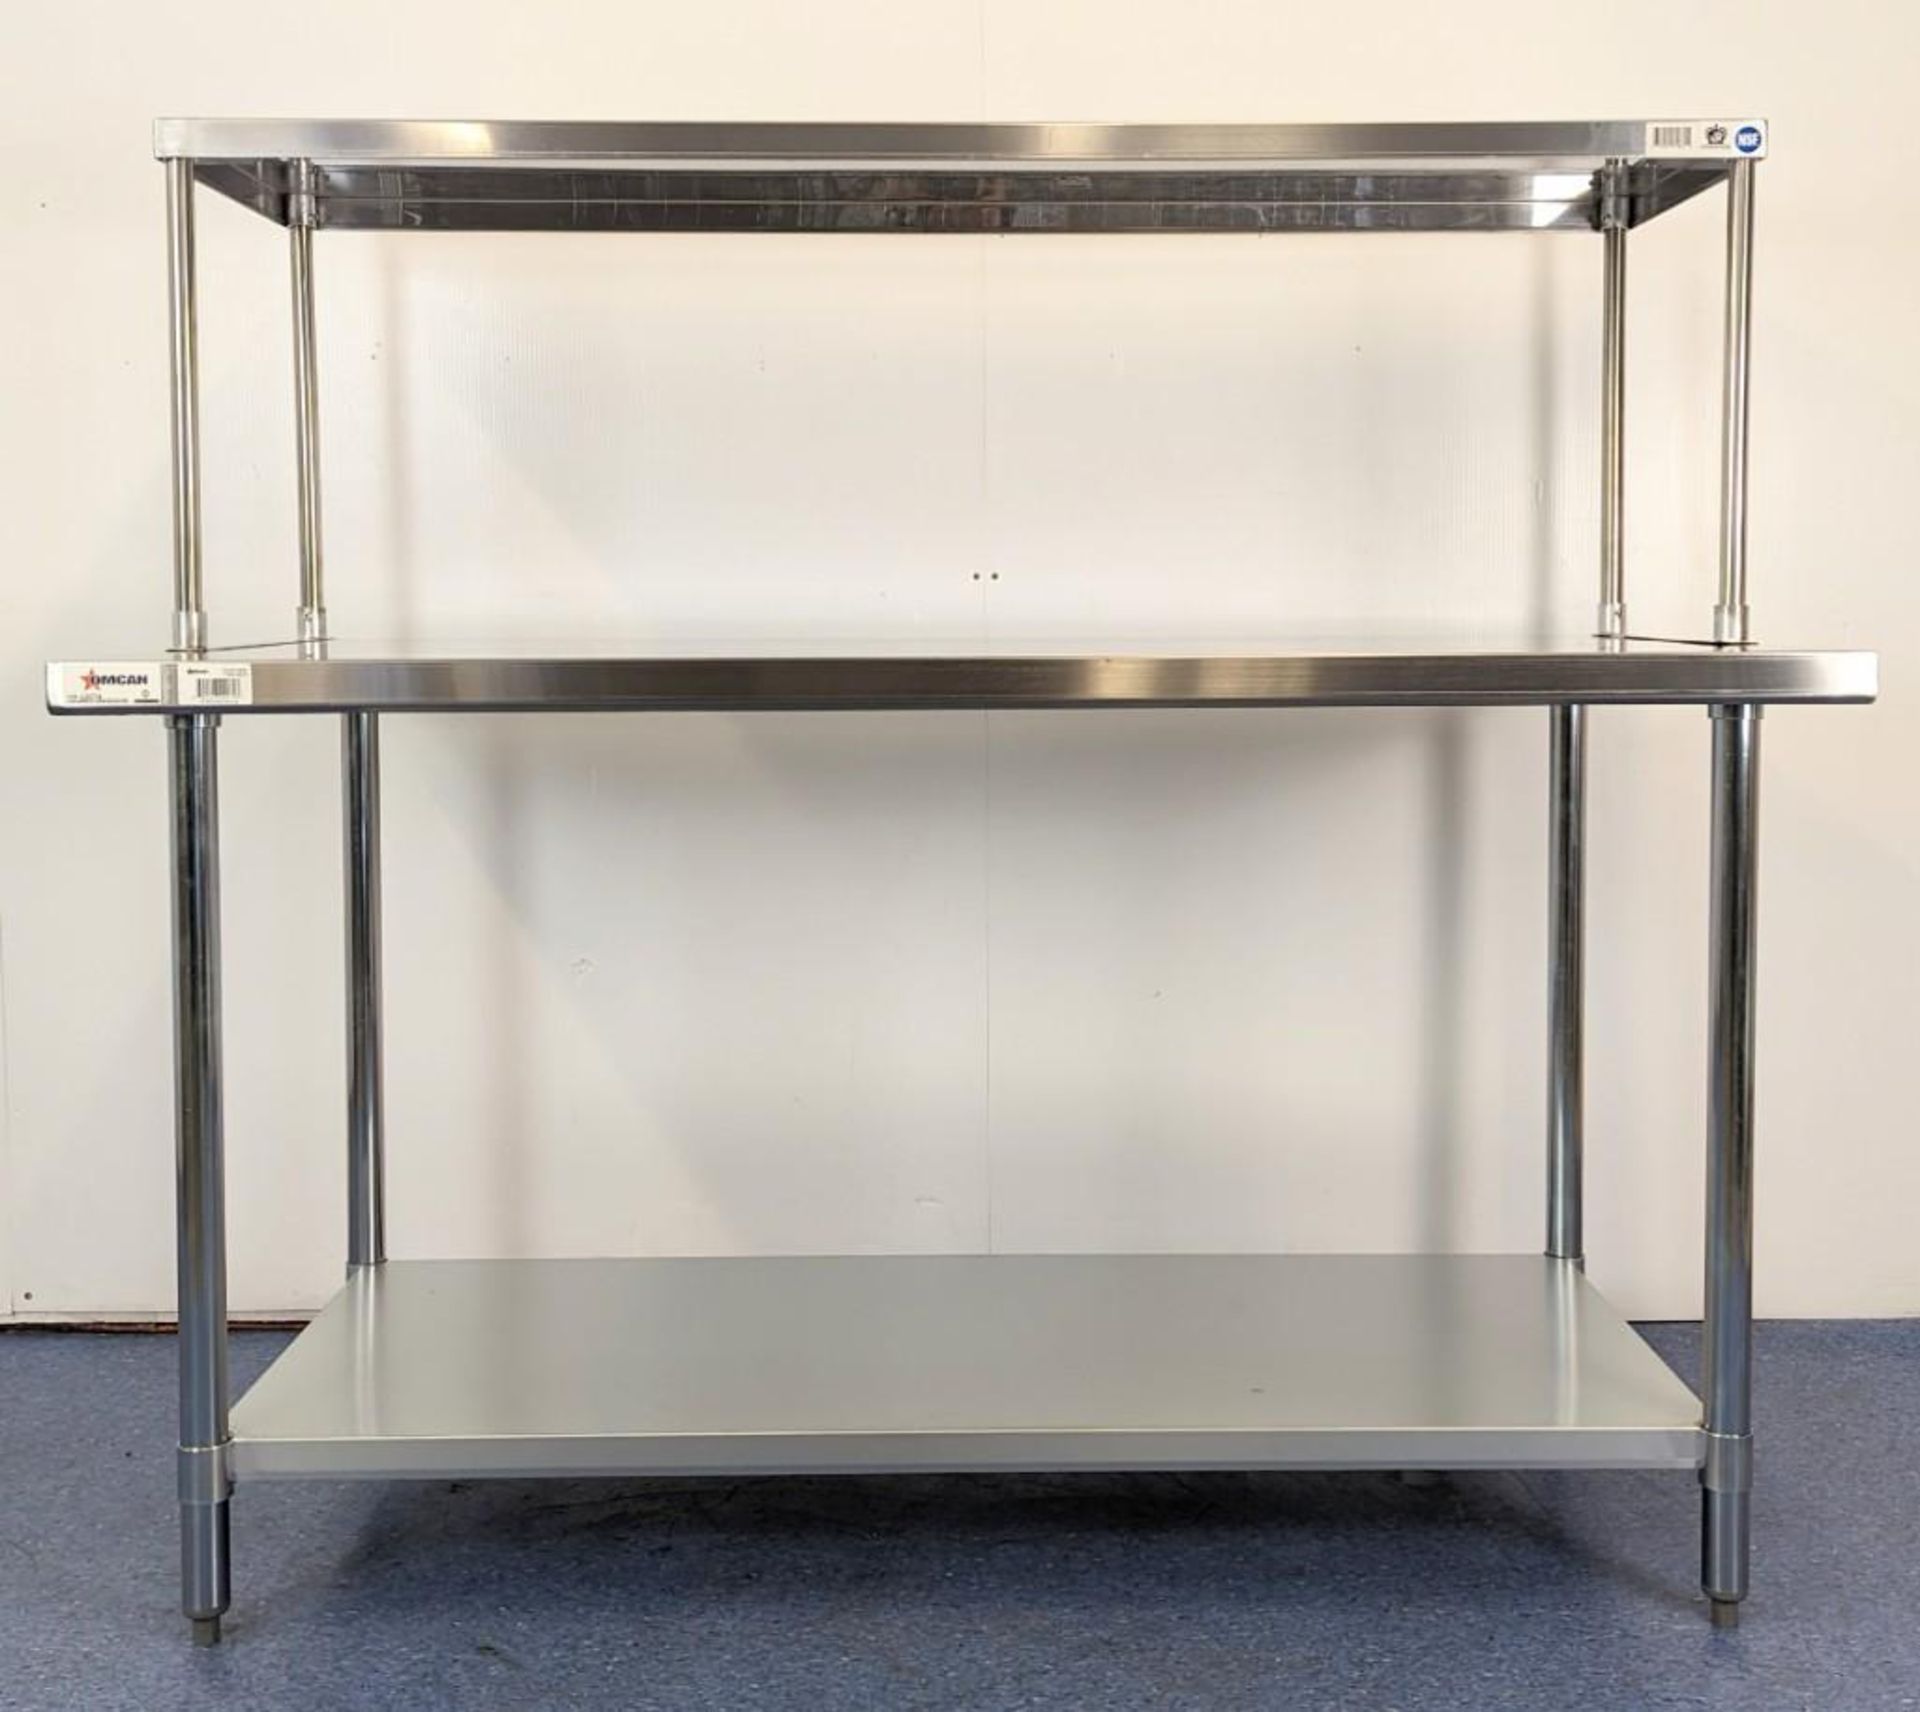 NEW 30" X 60" STAINLESS WORK TABLE WITH 18" SINGLE OVERSHELF - Image 4 of 8